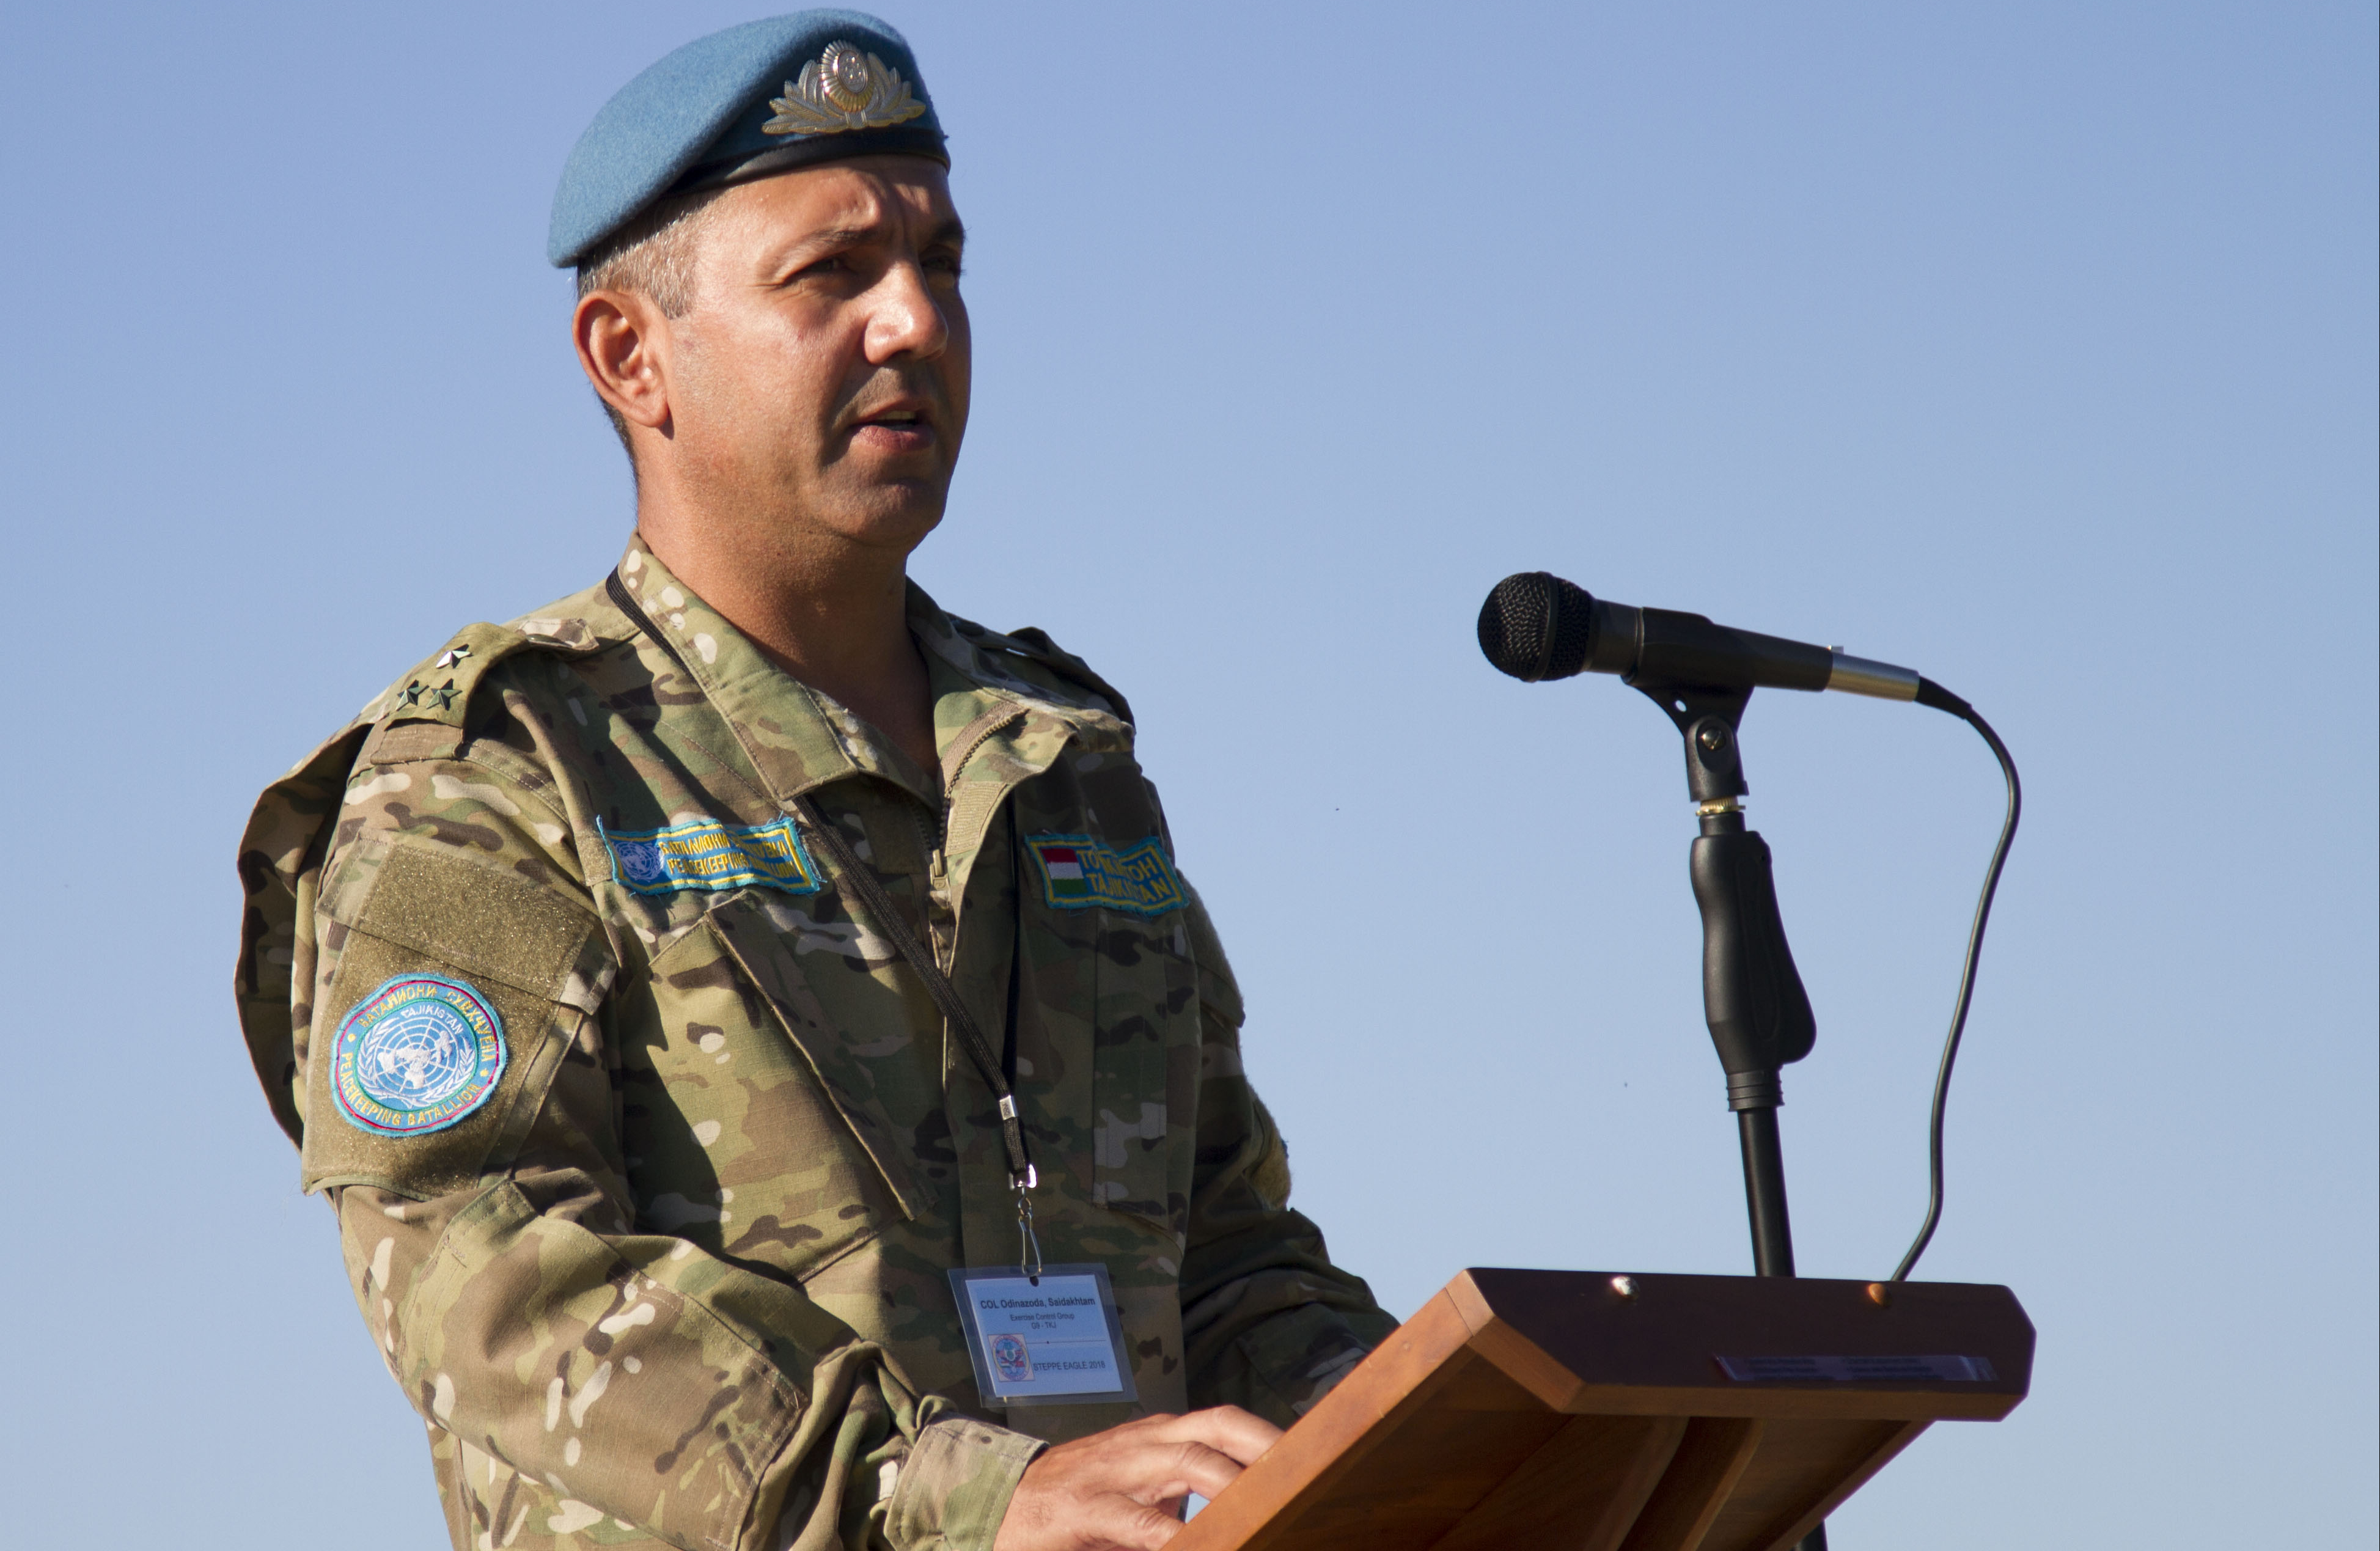 Kazakhstan Colonel addressing opening ceremonies for Steppe Eagle exercise.